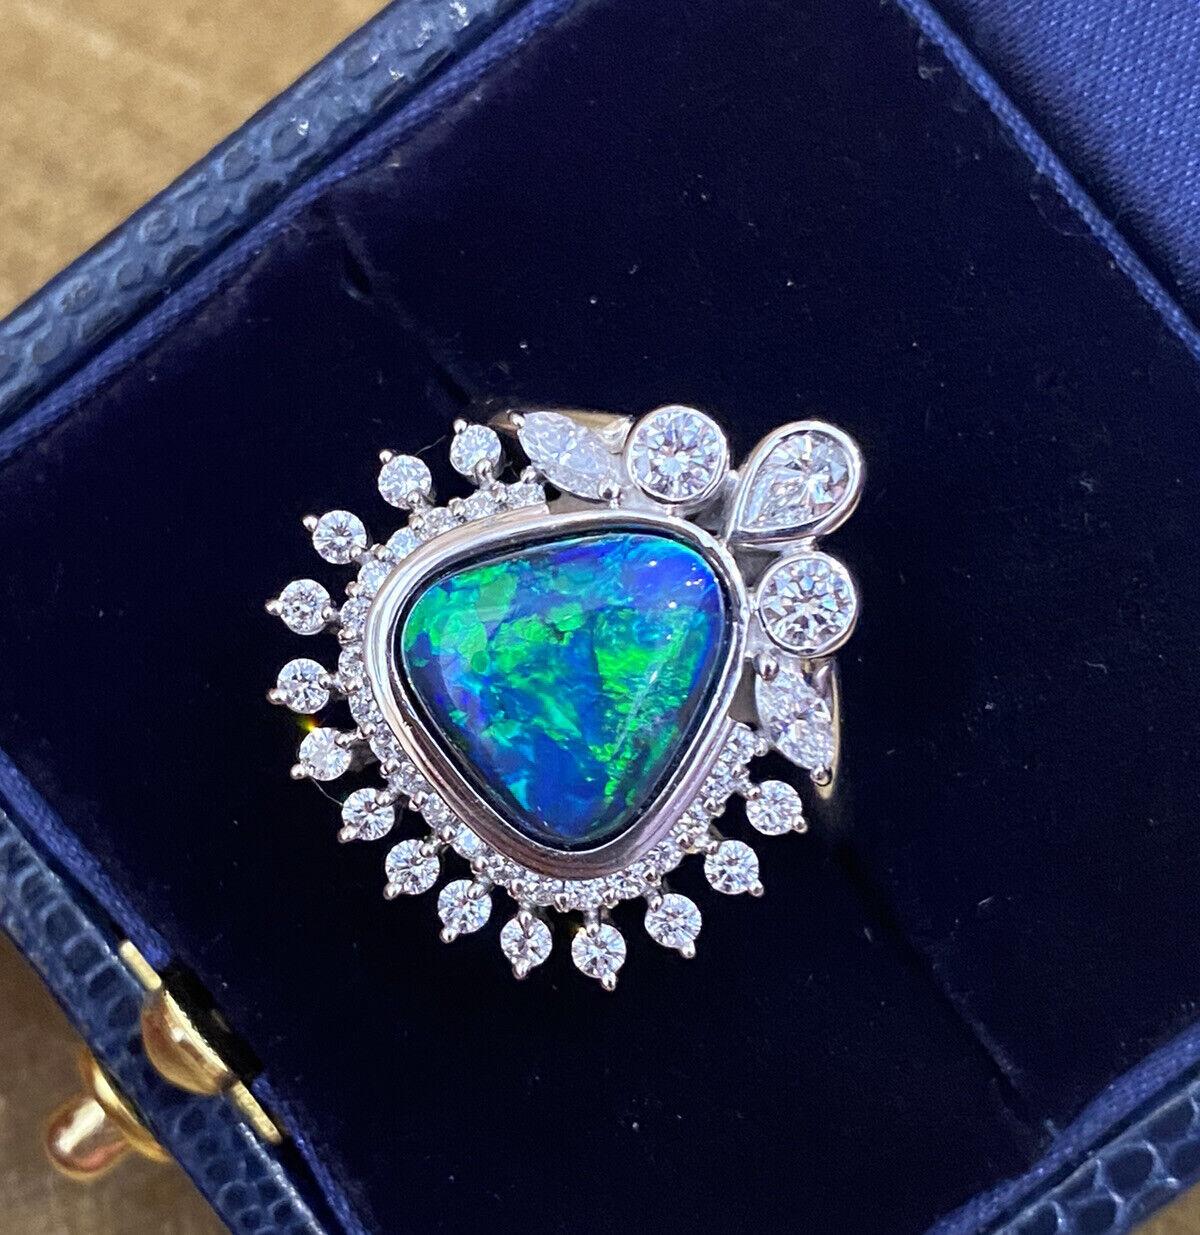 4.23 Carats Black Opal and Diamond Ring in Platinum 

Black Opal and Diamond Ring features a 4.23 carats, with beautiful blue, green, yellow coloring. 
Black Opal bezel-set in the center, surrounded by a halo of Round Diamonds and a second halo of